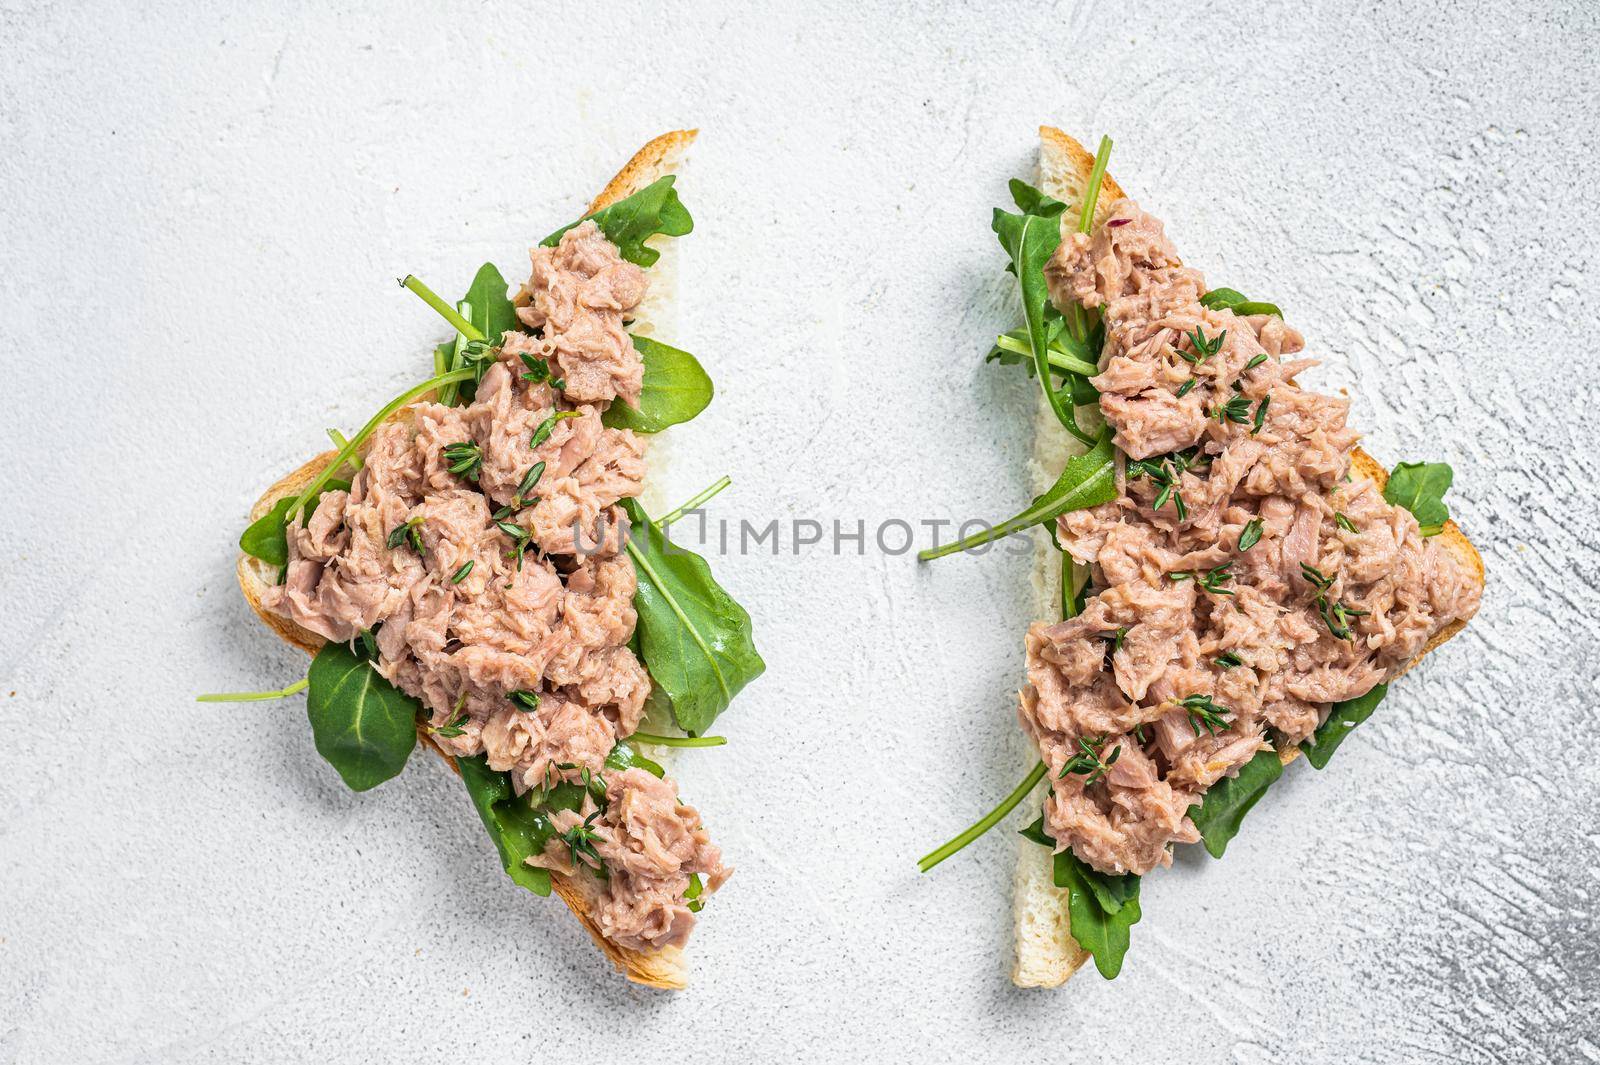 Toast with Canned Tuna fish and arugula. White background. Top view by Composter